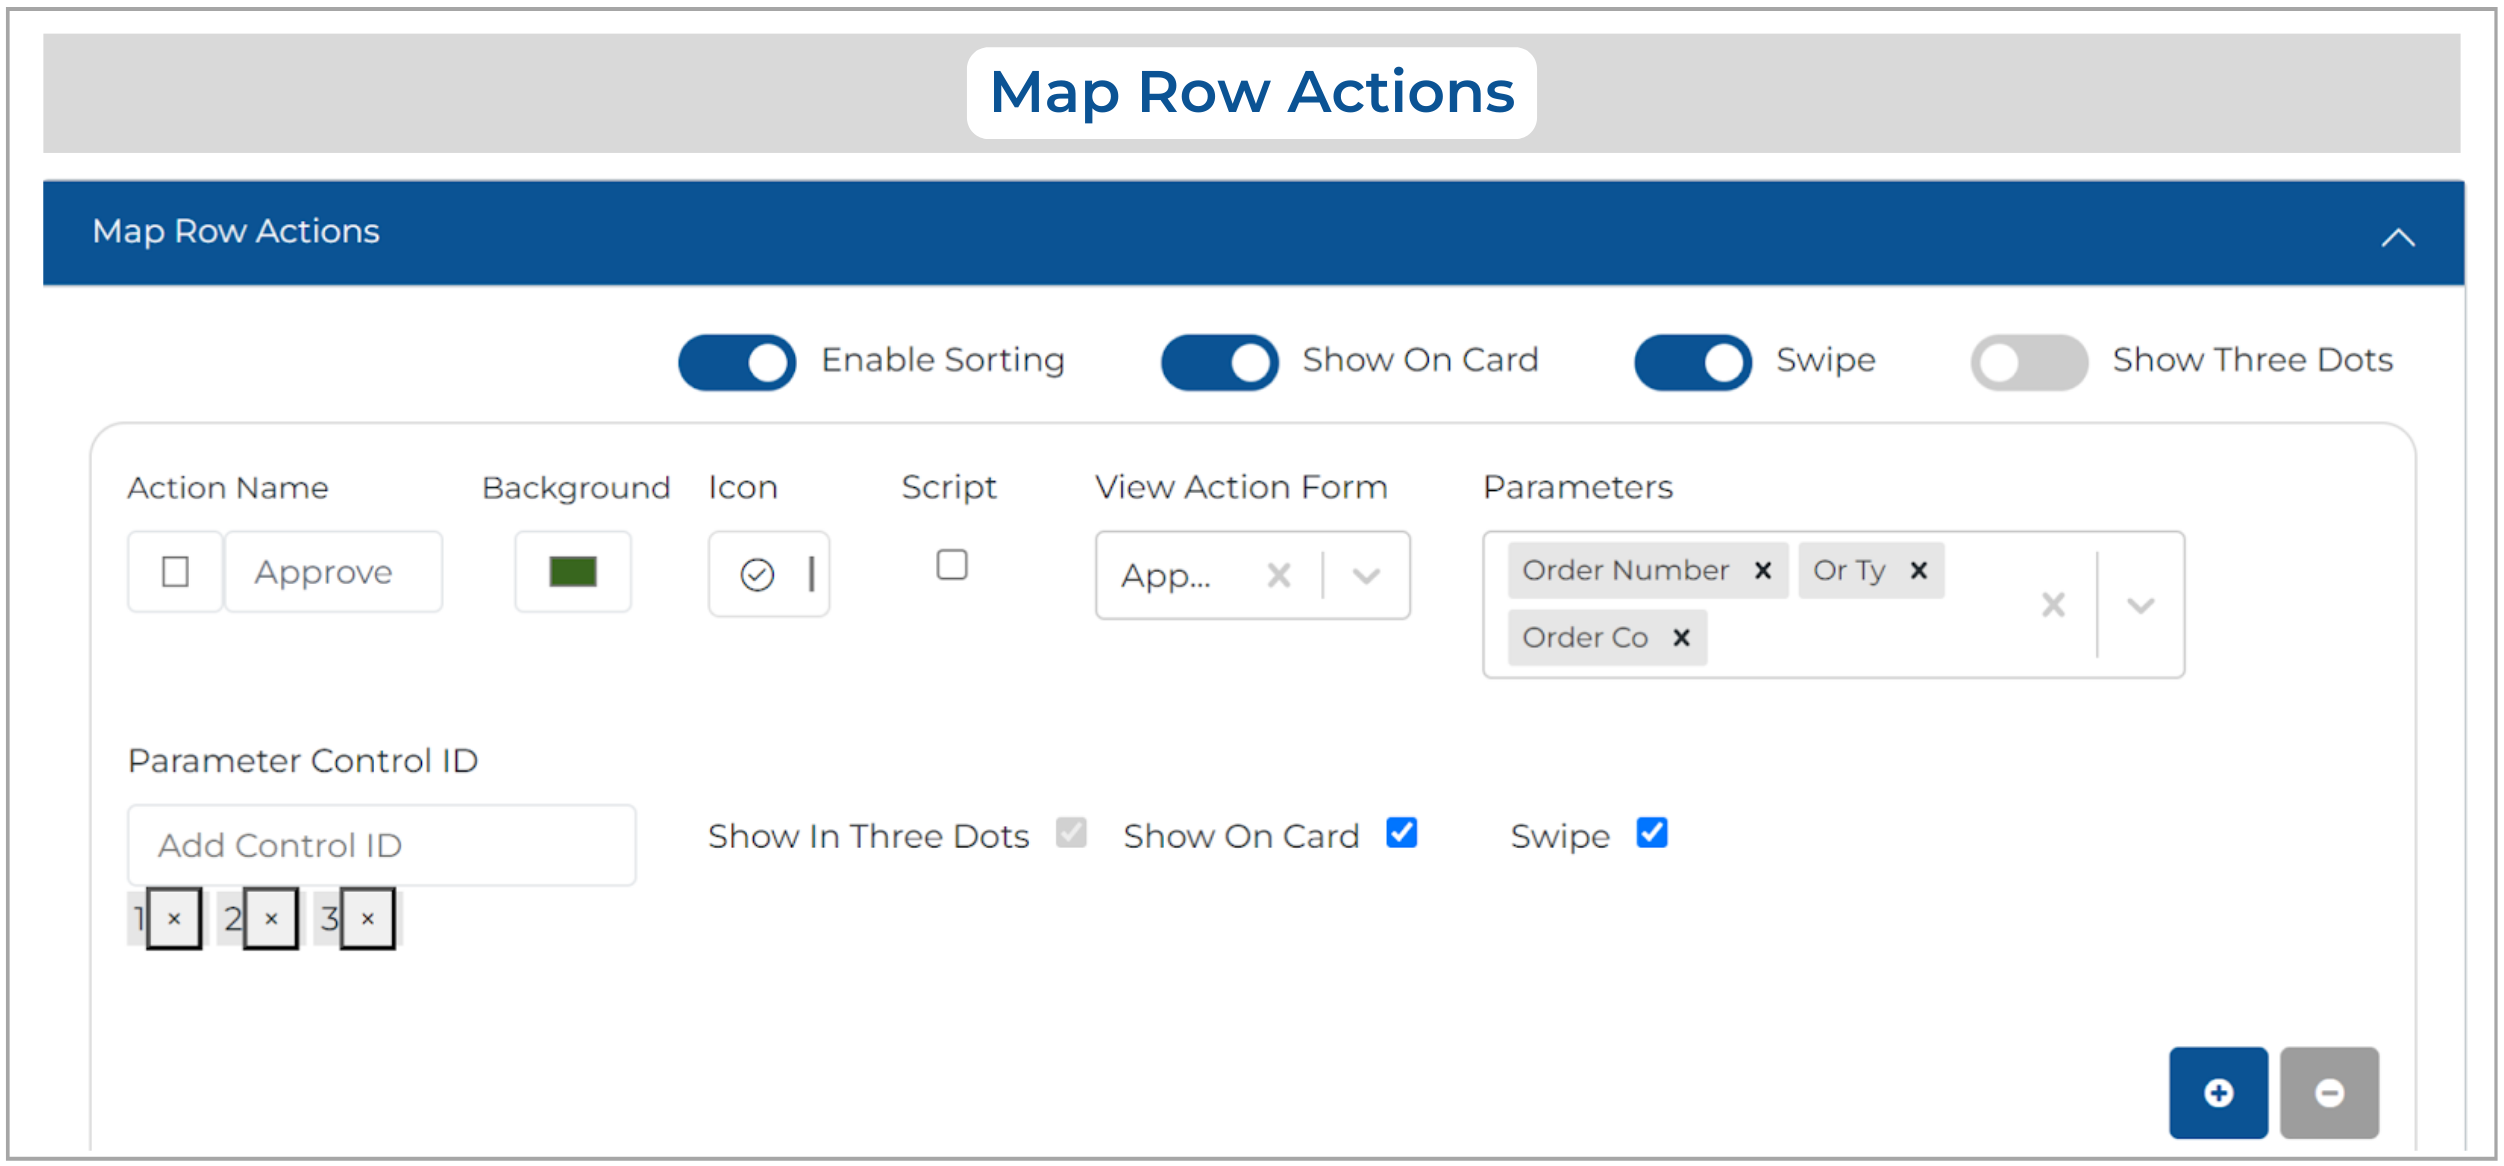 Map Row Actions